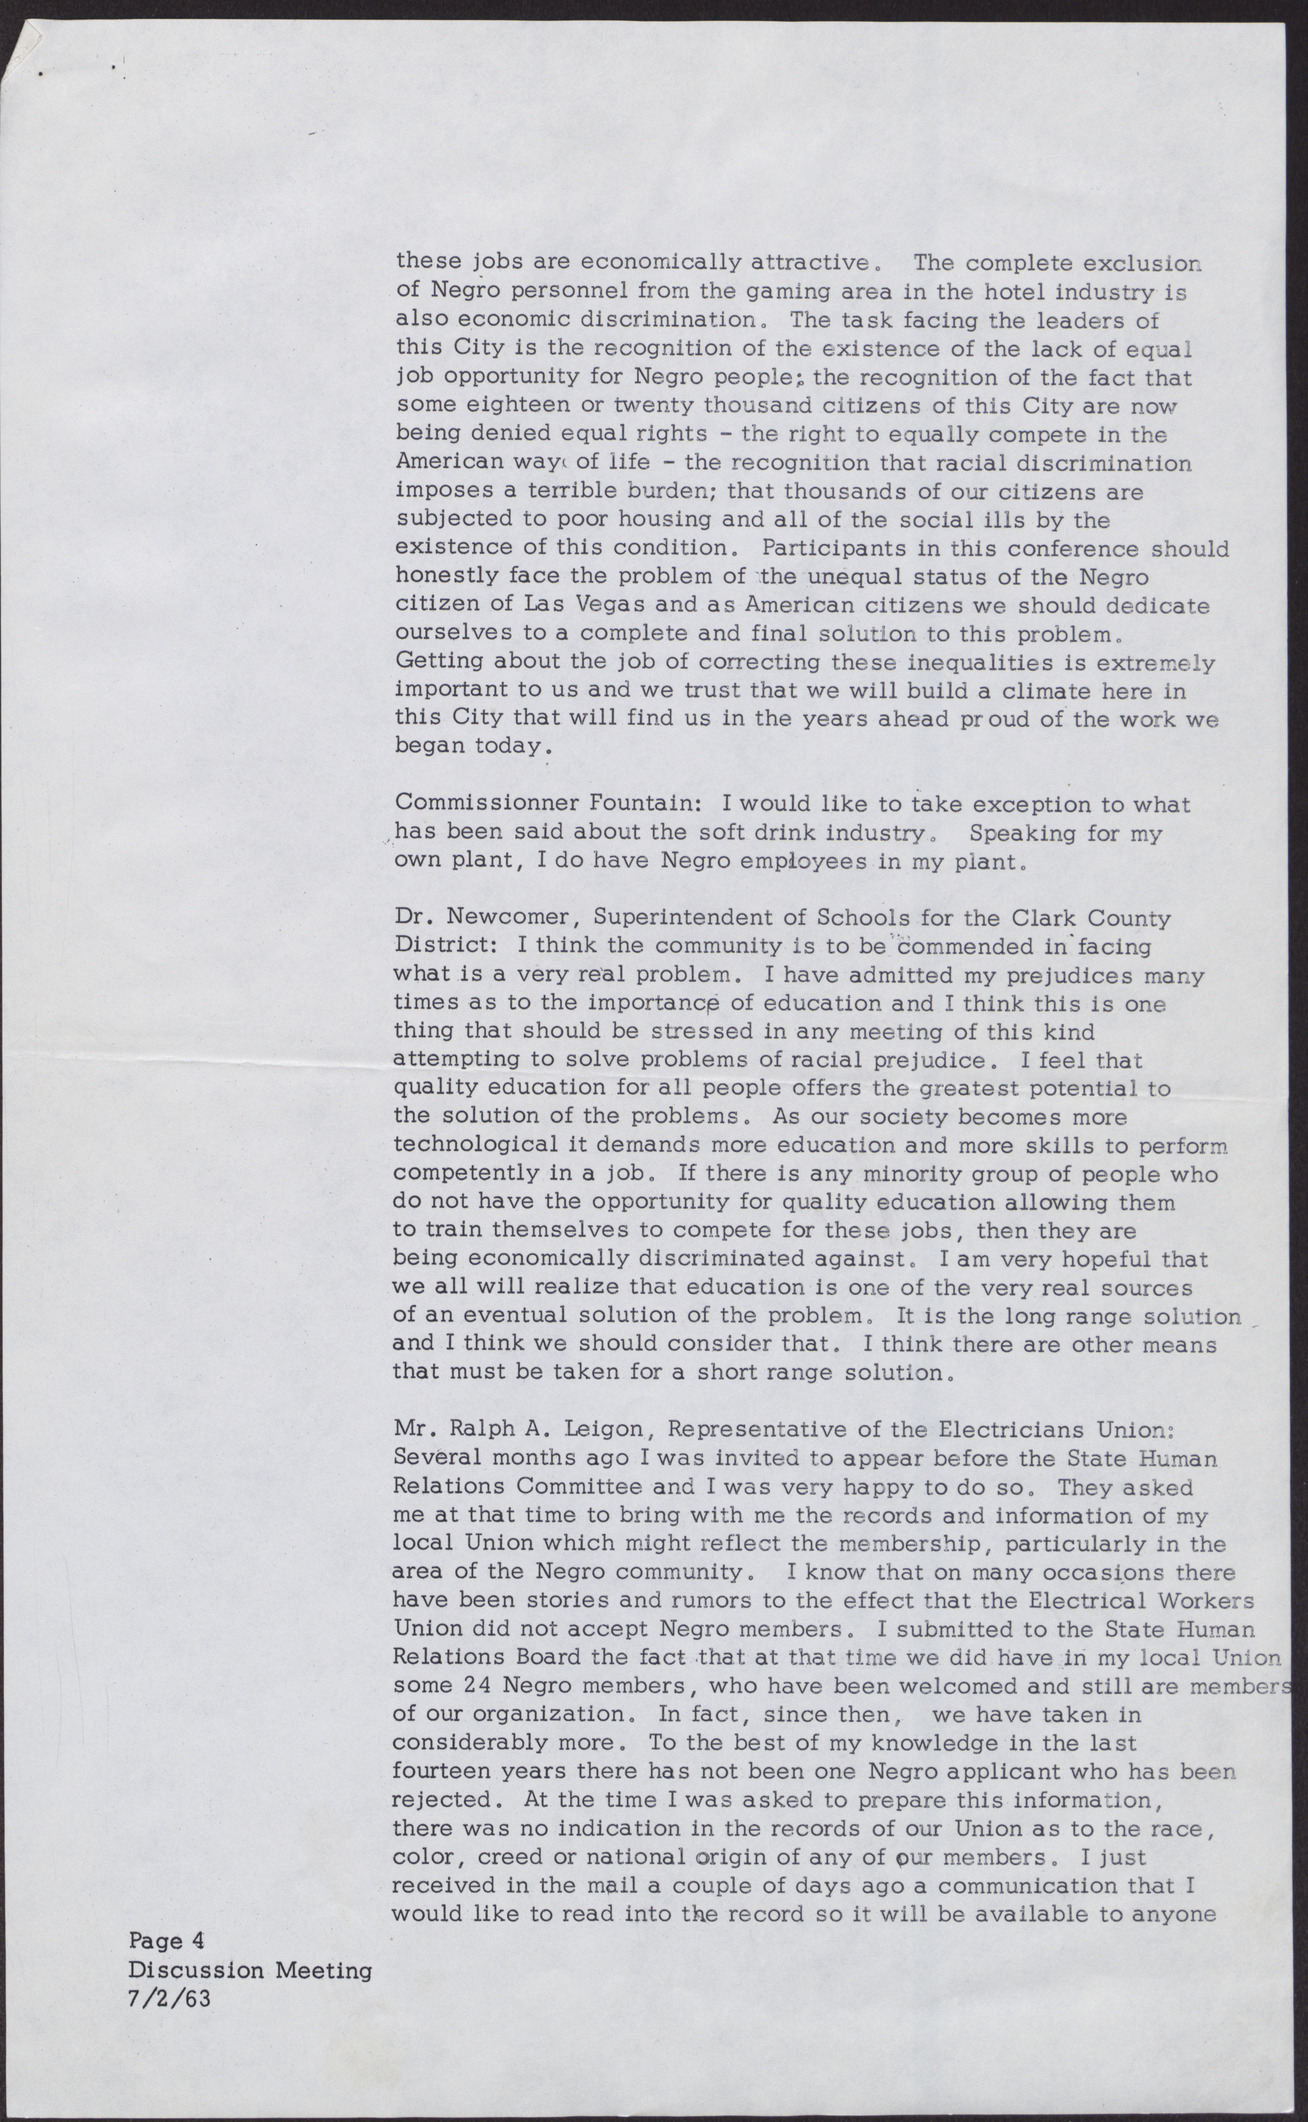 Minutes from a meeting with Board of Commissioners for the City of Las Vegas (13 pages), July 2, 1963, page 4